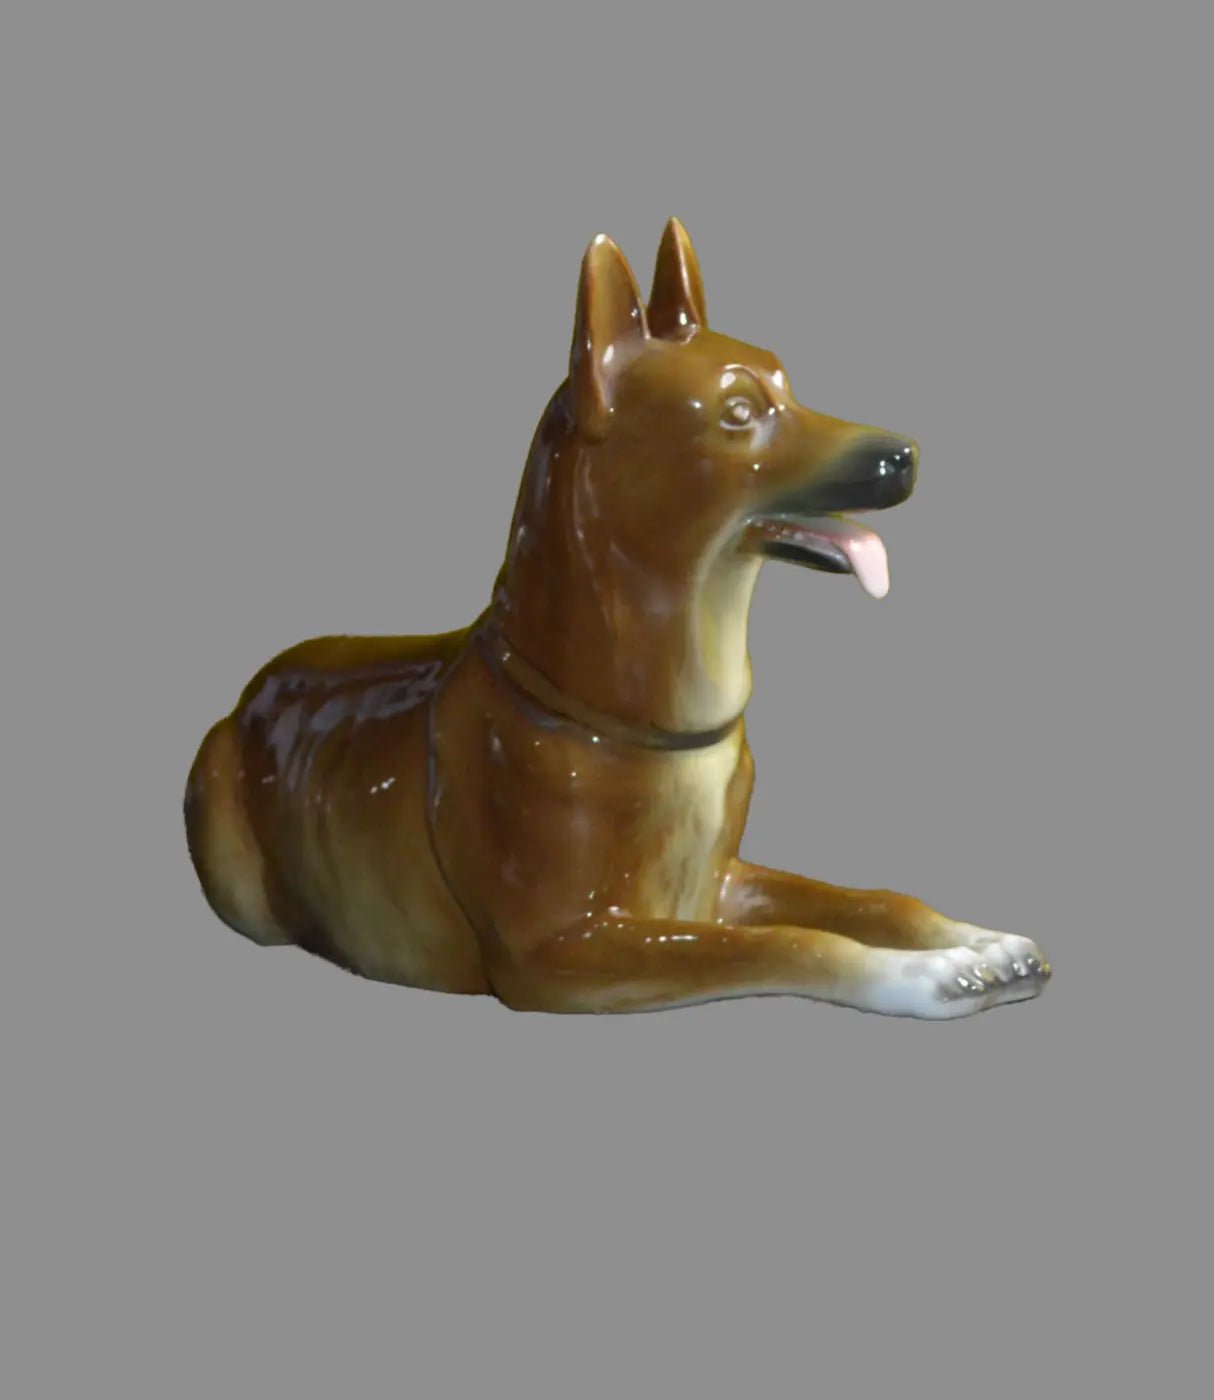 DOG FIGURINE ALSATIAN(PREVIOUSLY OWNED)REALLY GOOD CONDITION - TMD167207